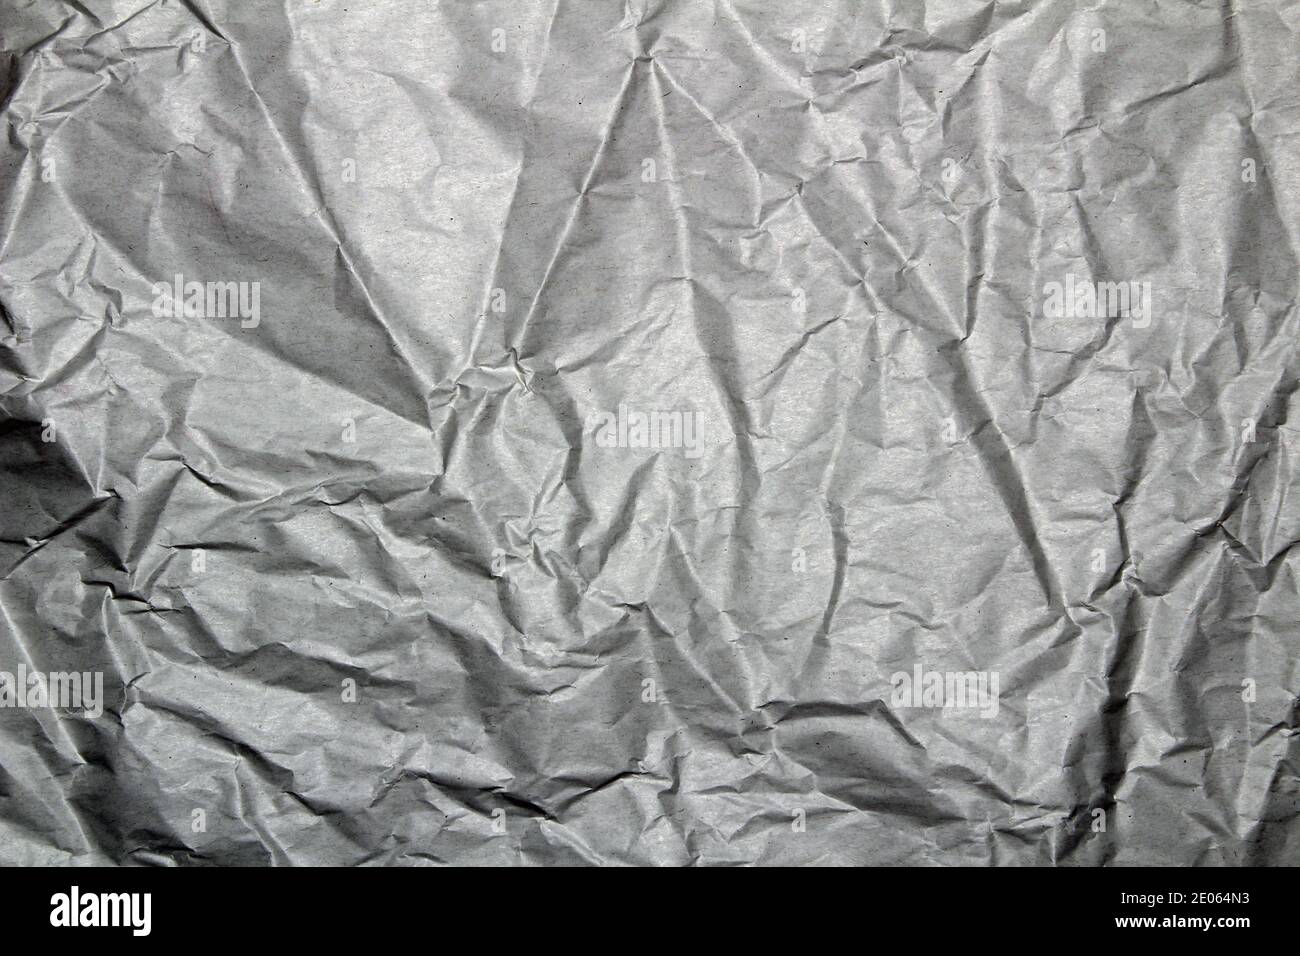 Crumpled grey silver textured plain background or wallpaper or webpage Stock Photo